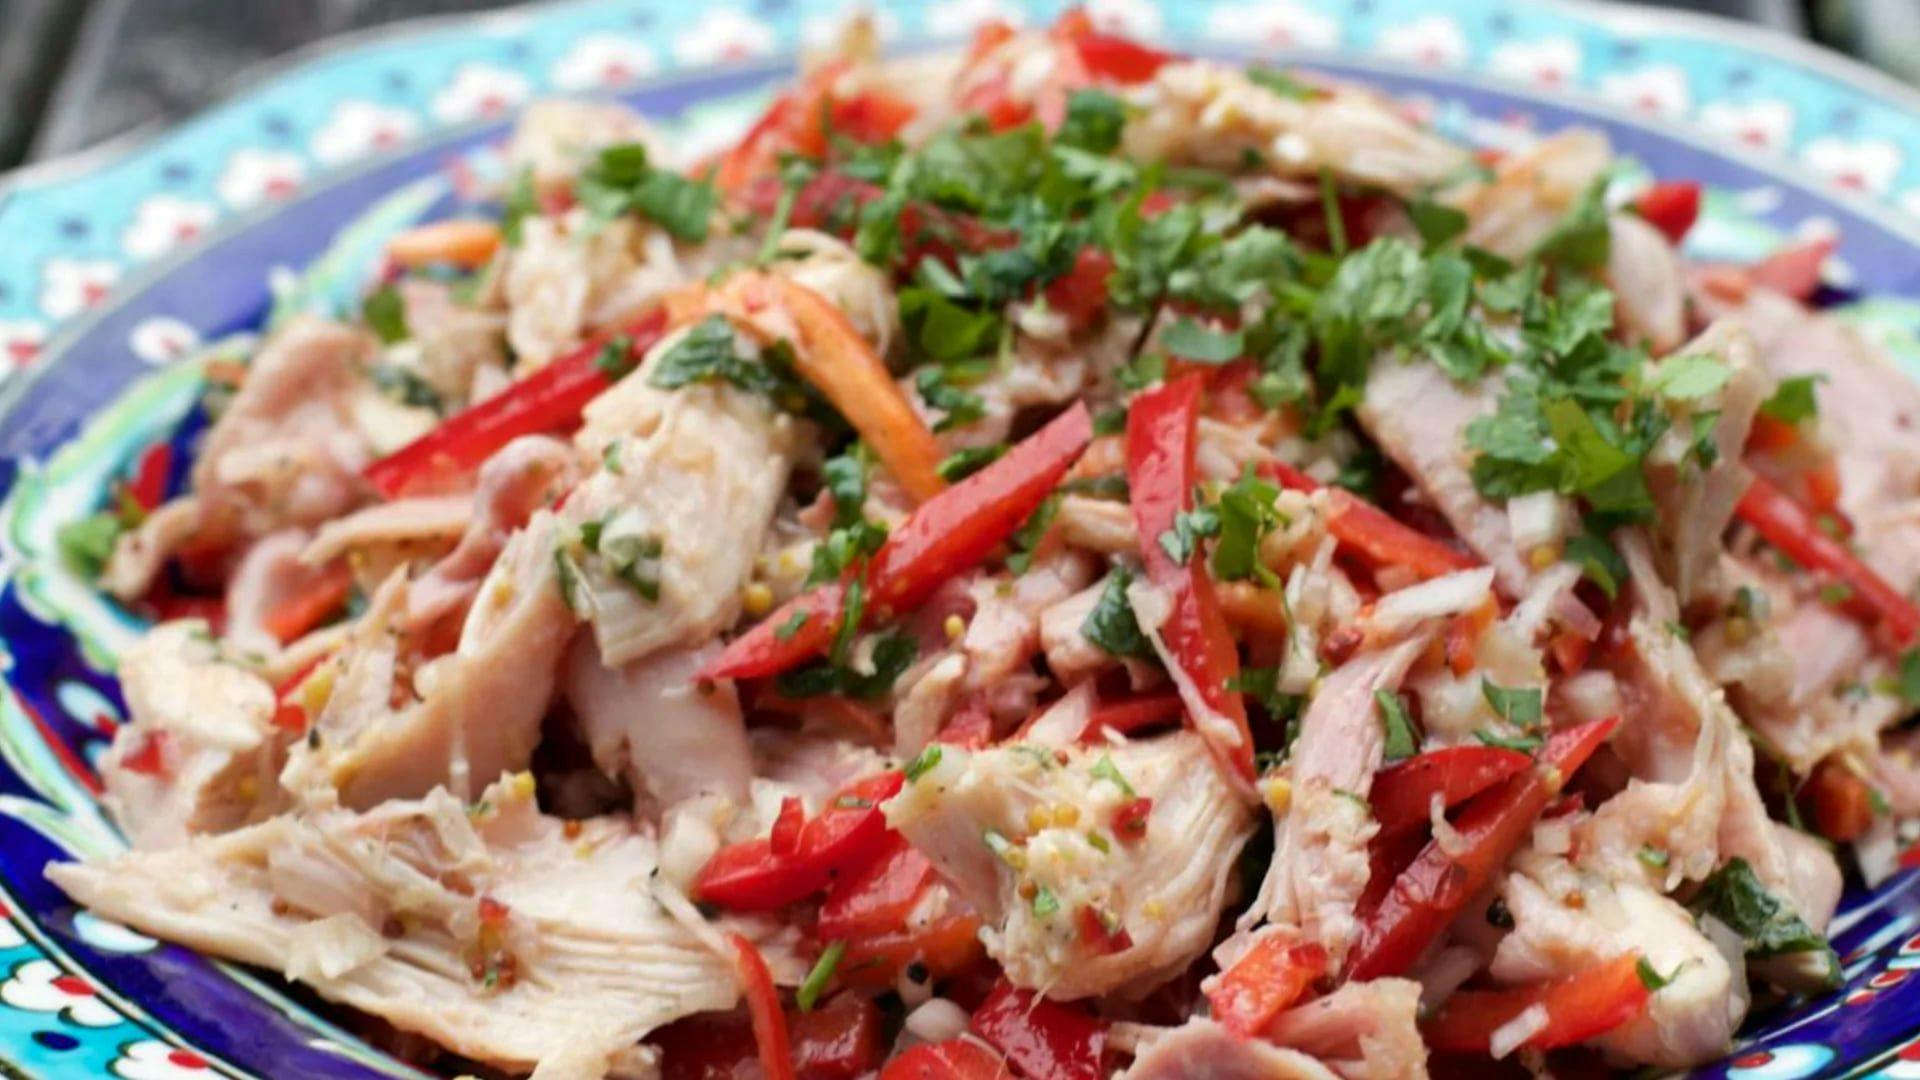 Smoked Chicken Salad with Ginger Dressing